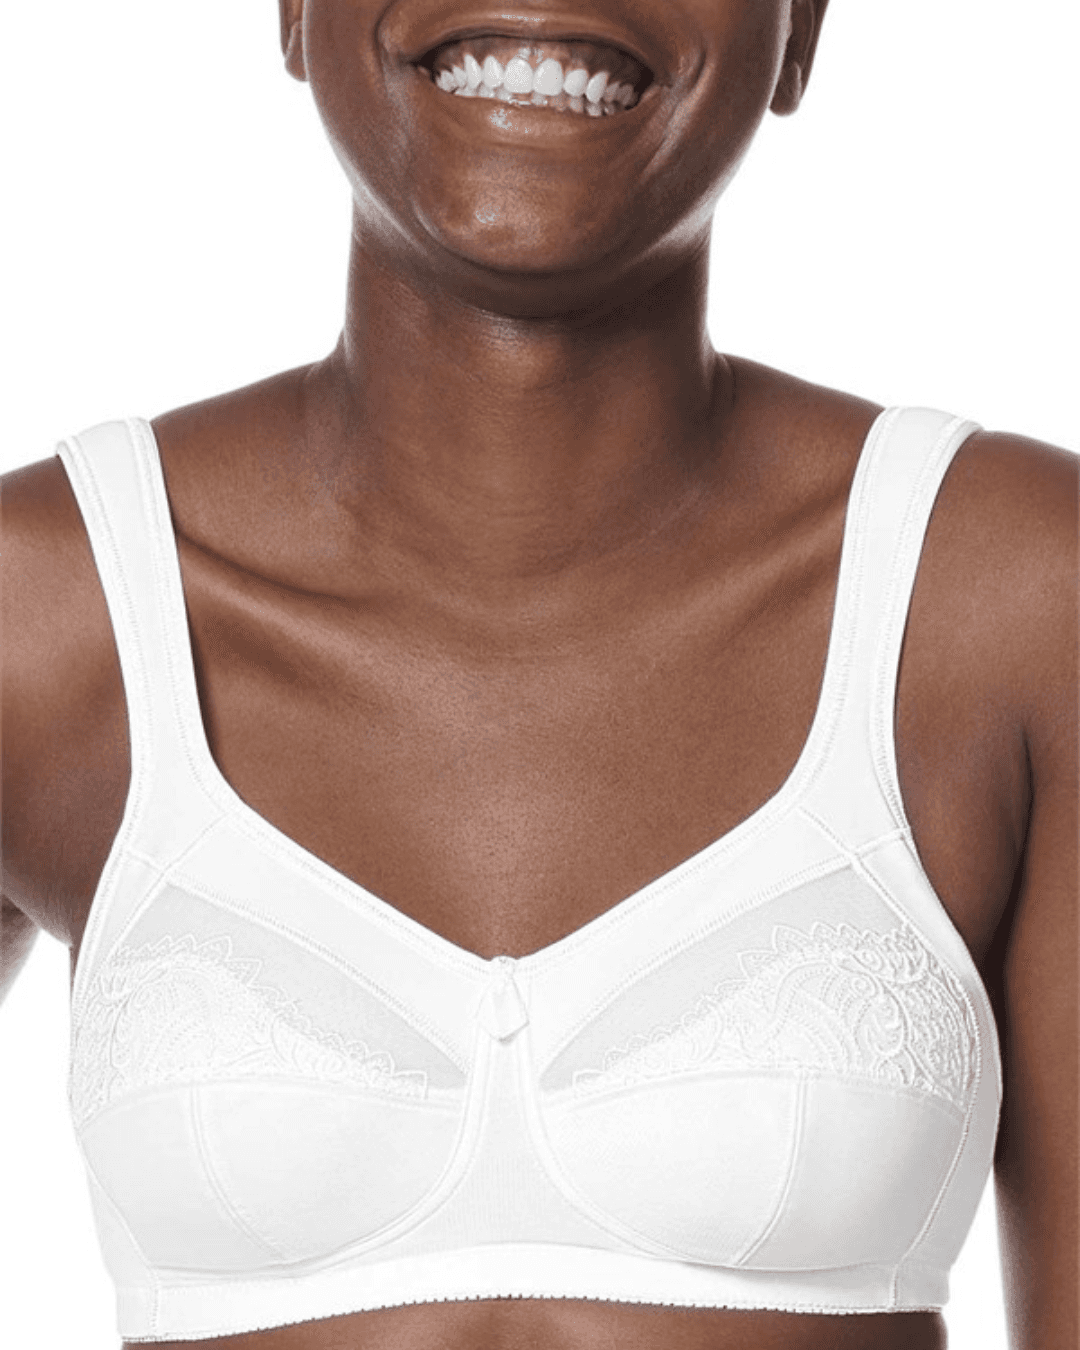 What is a Post Mastectomy Bra? - A Fitting Experience